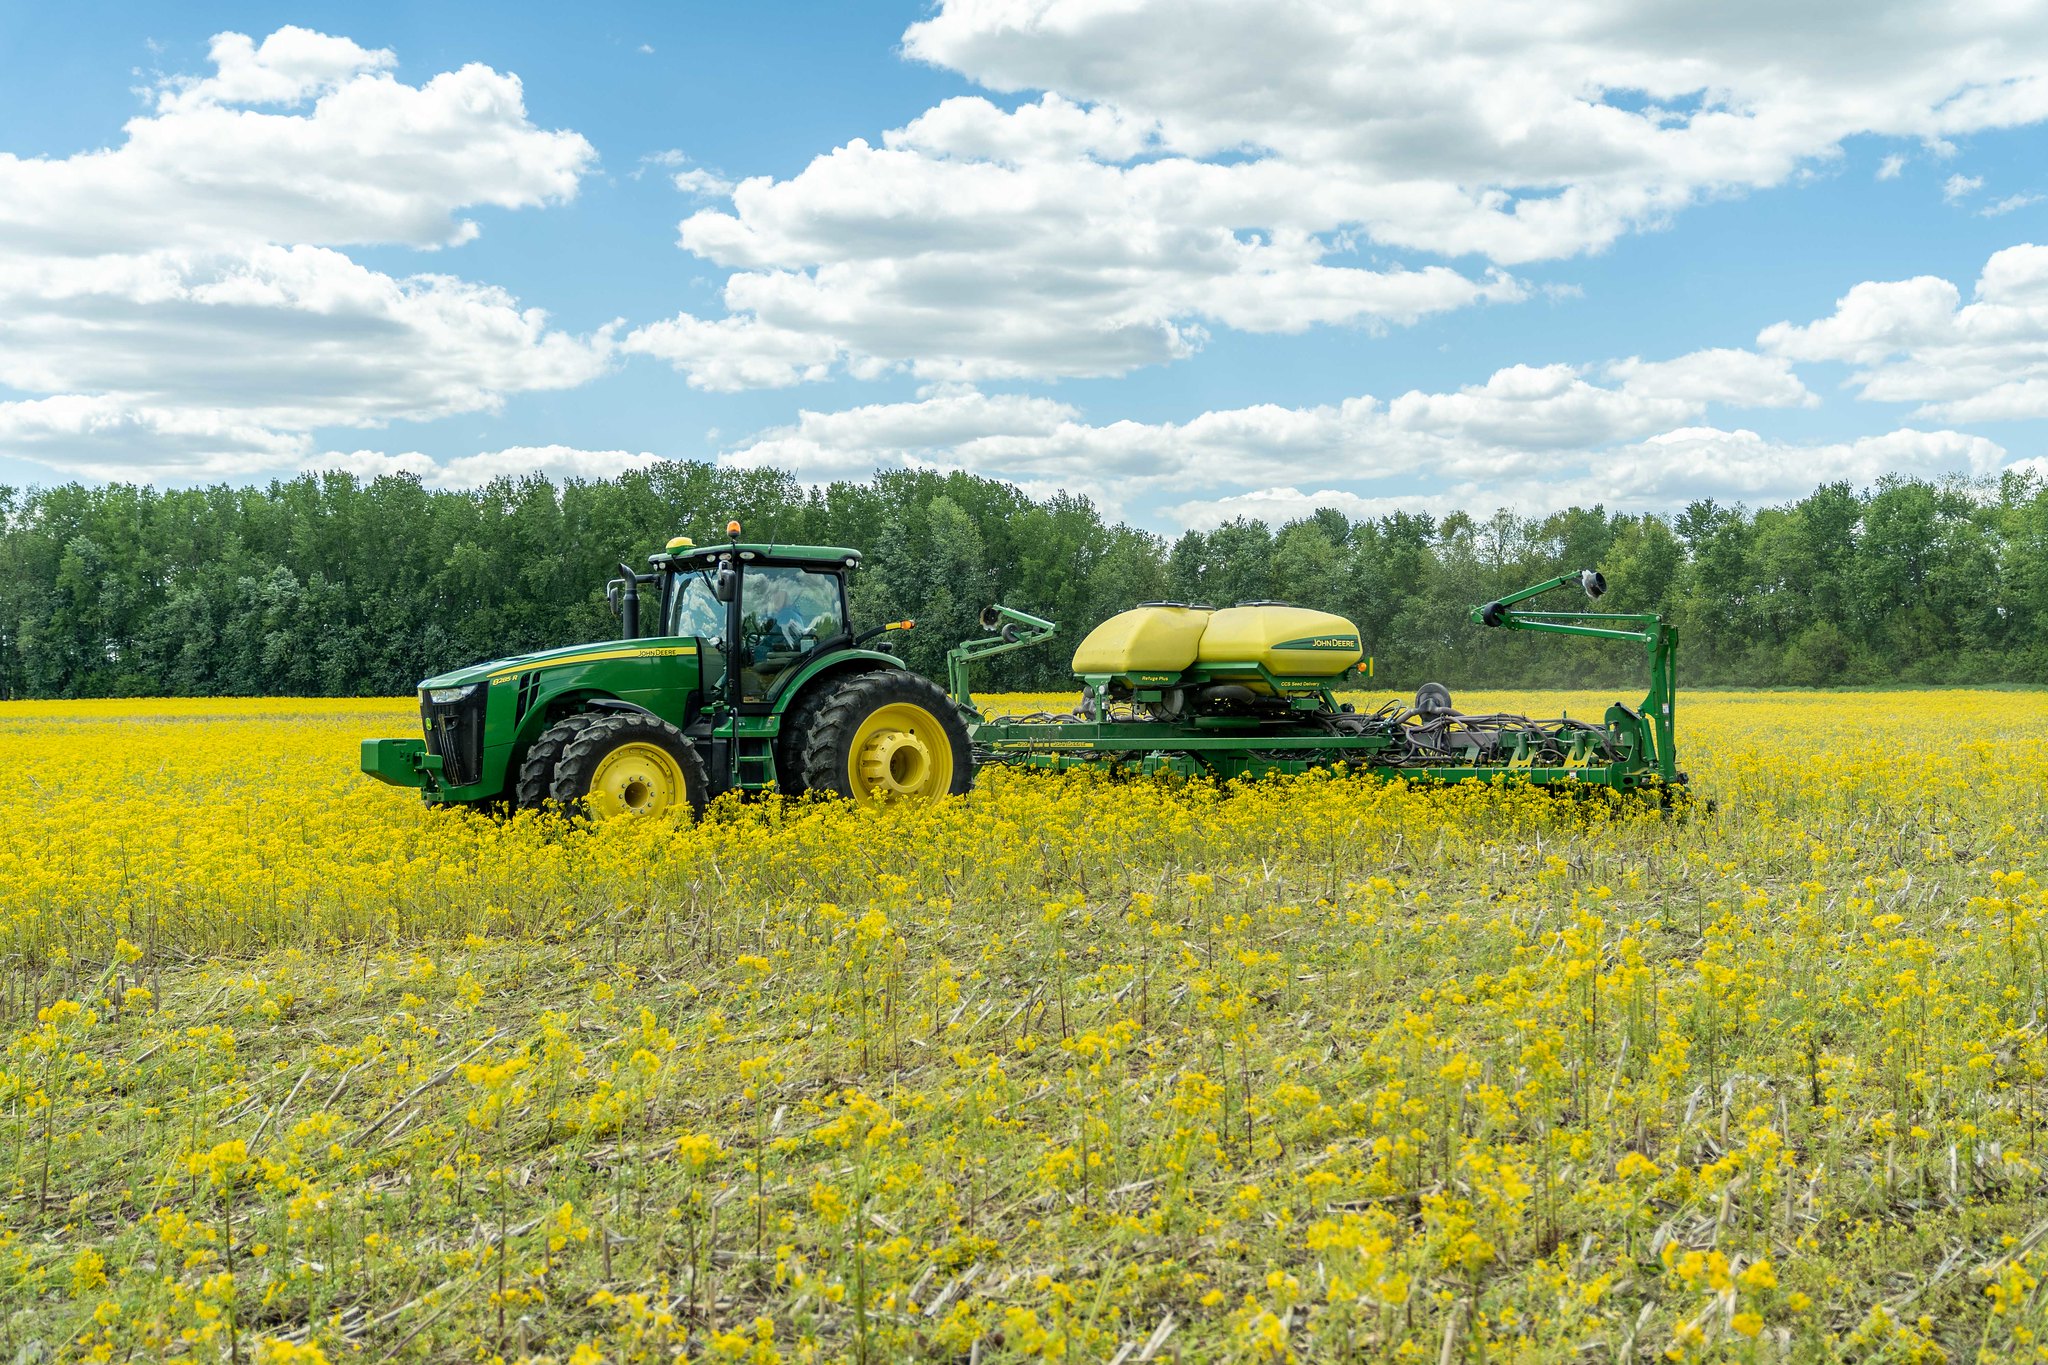 A tractor passes through a wide, flat field filled with yellow flowers.